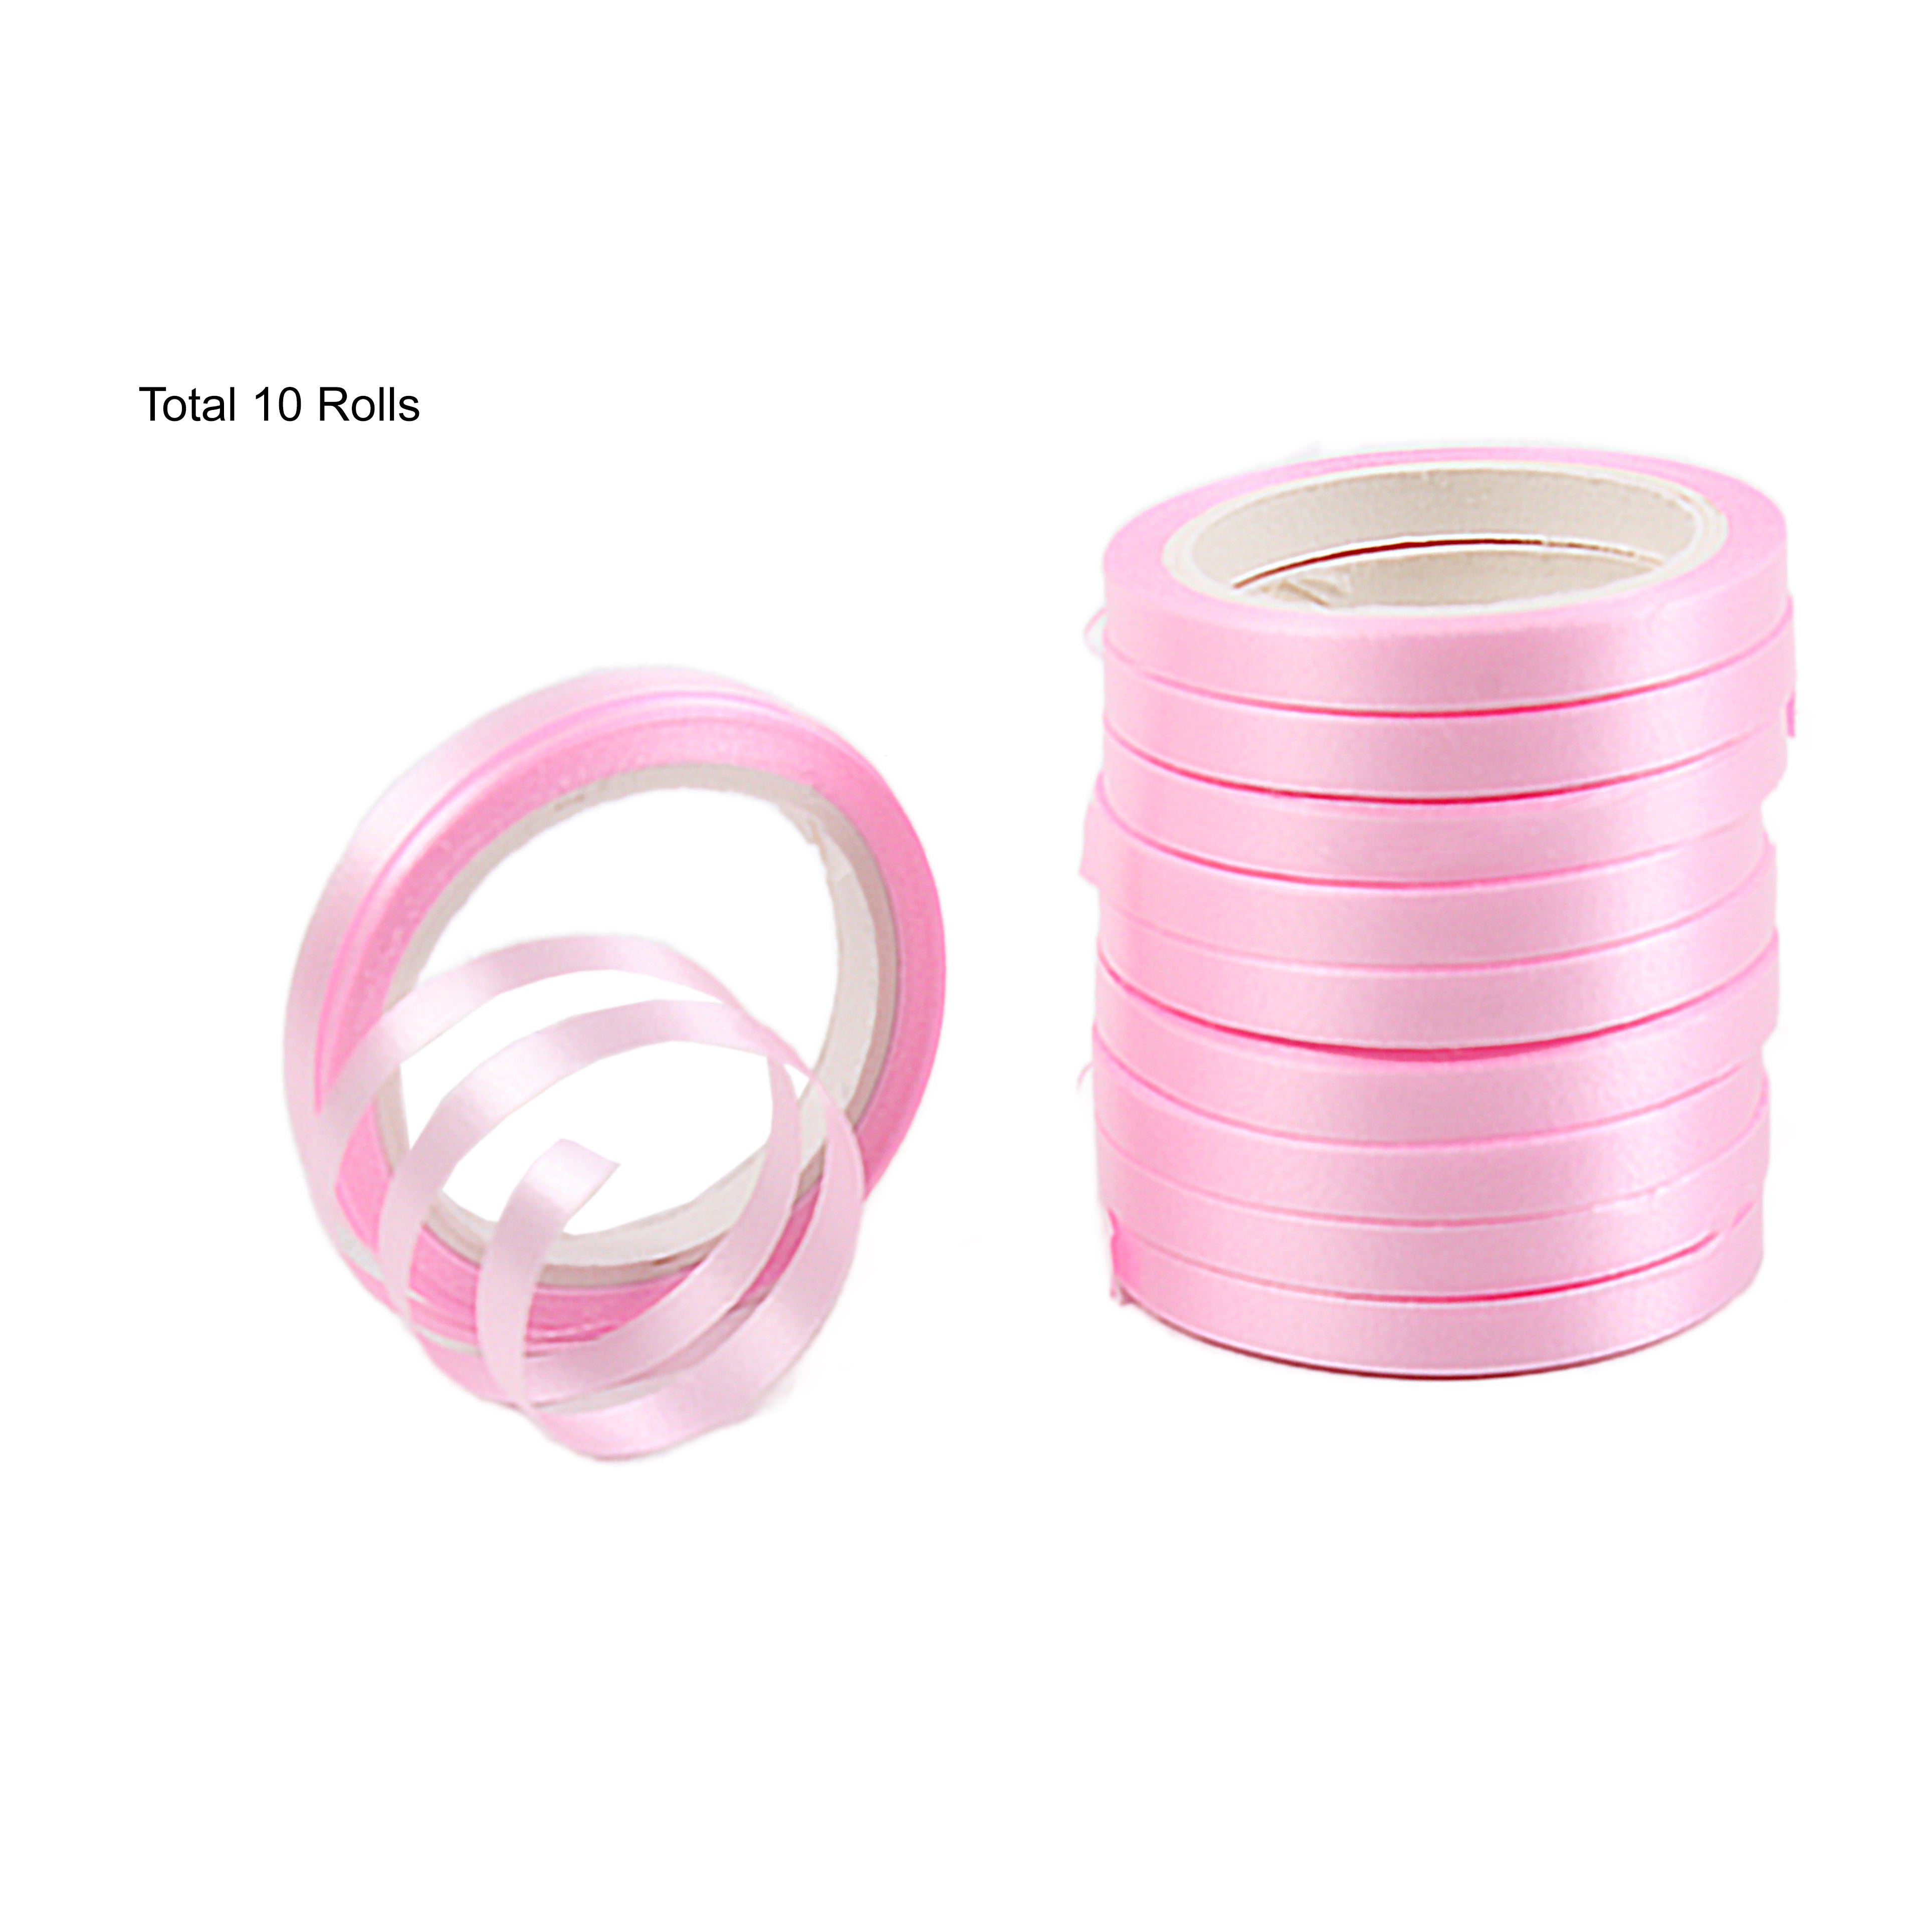 Curling Ribbon For Balloon Decoration 3mm X 3mtr Baby Pink 10pc